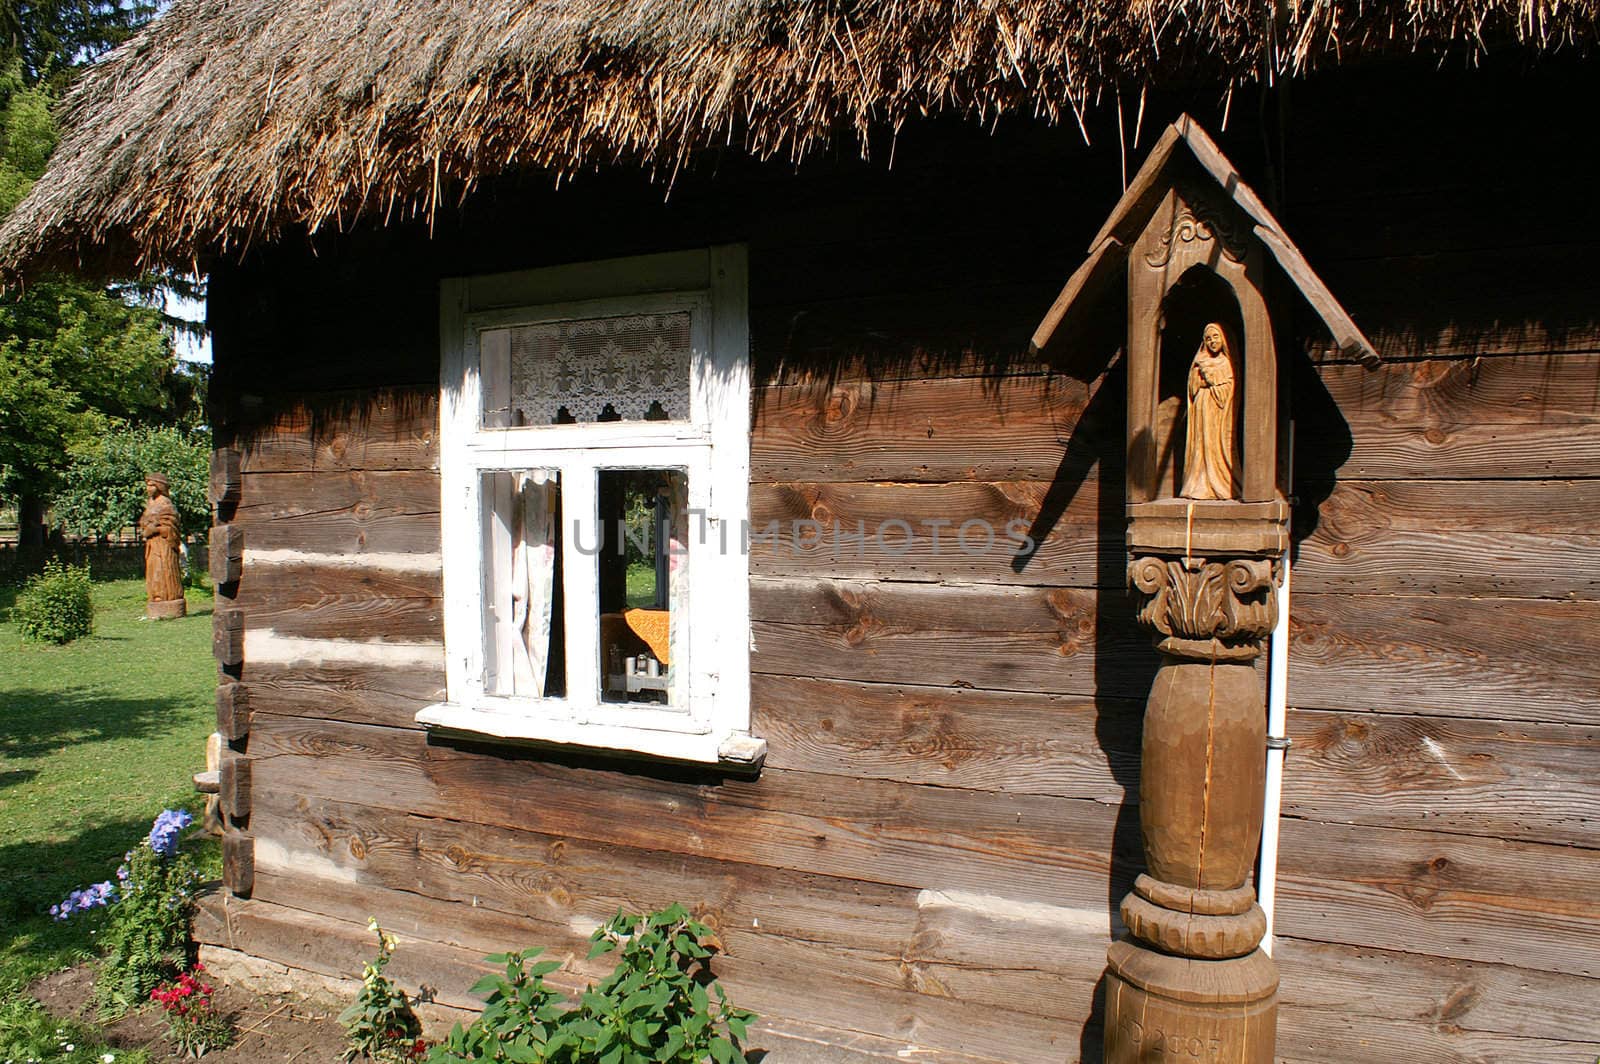 Very old cottage with wood from Poland